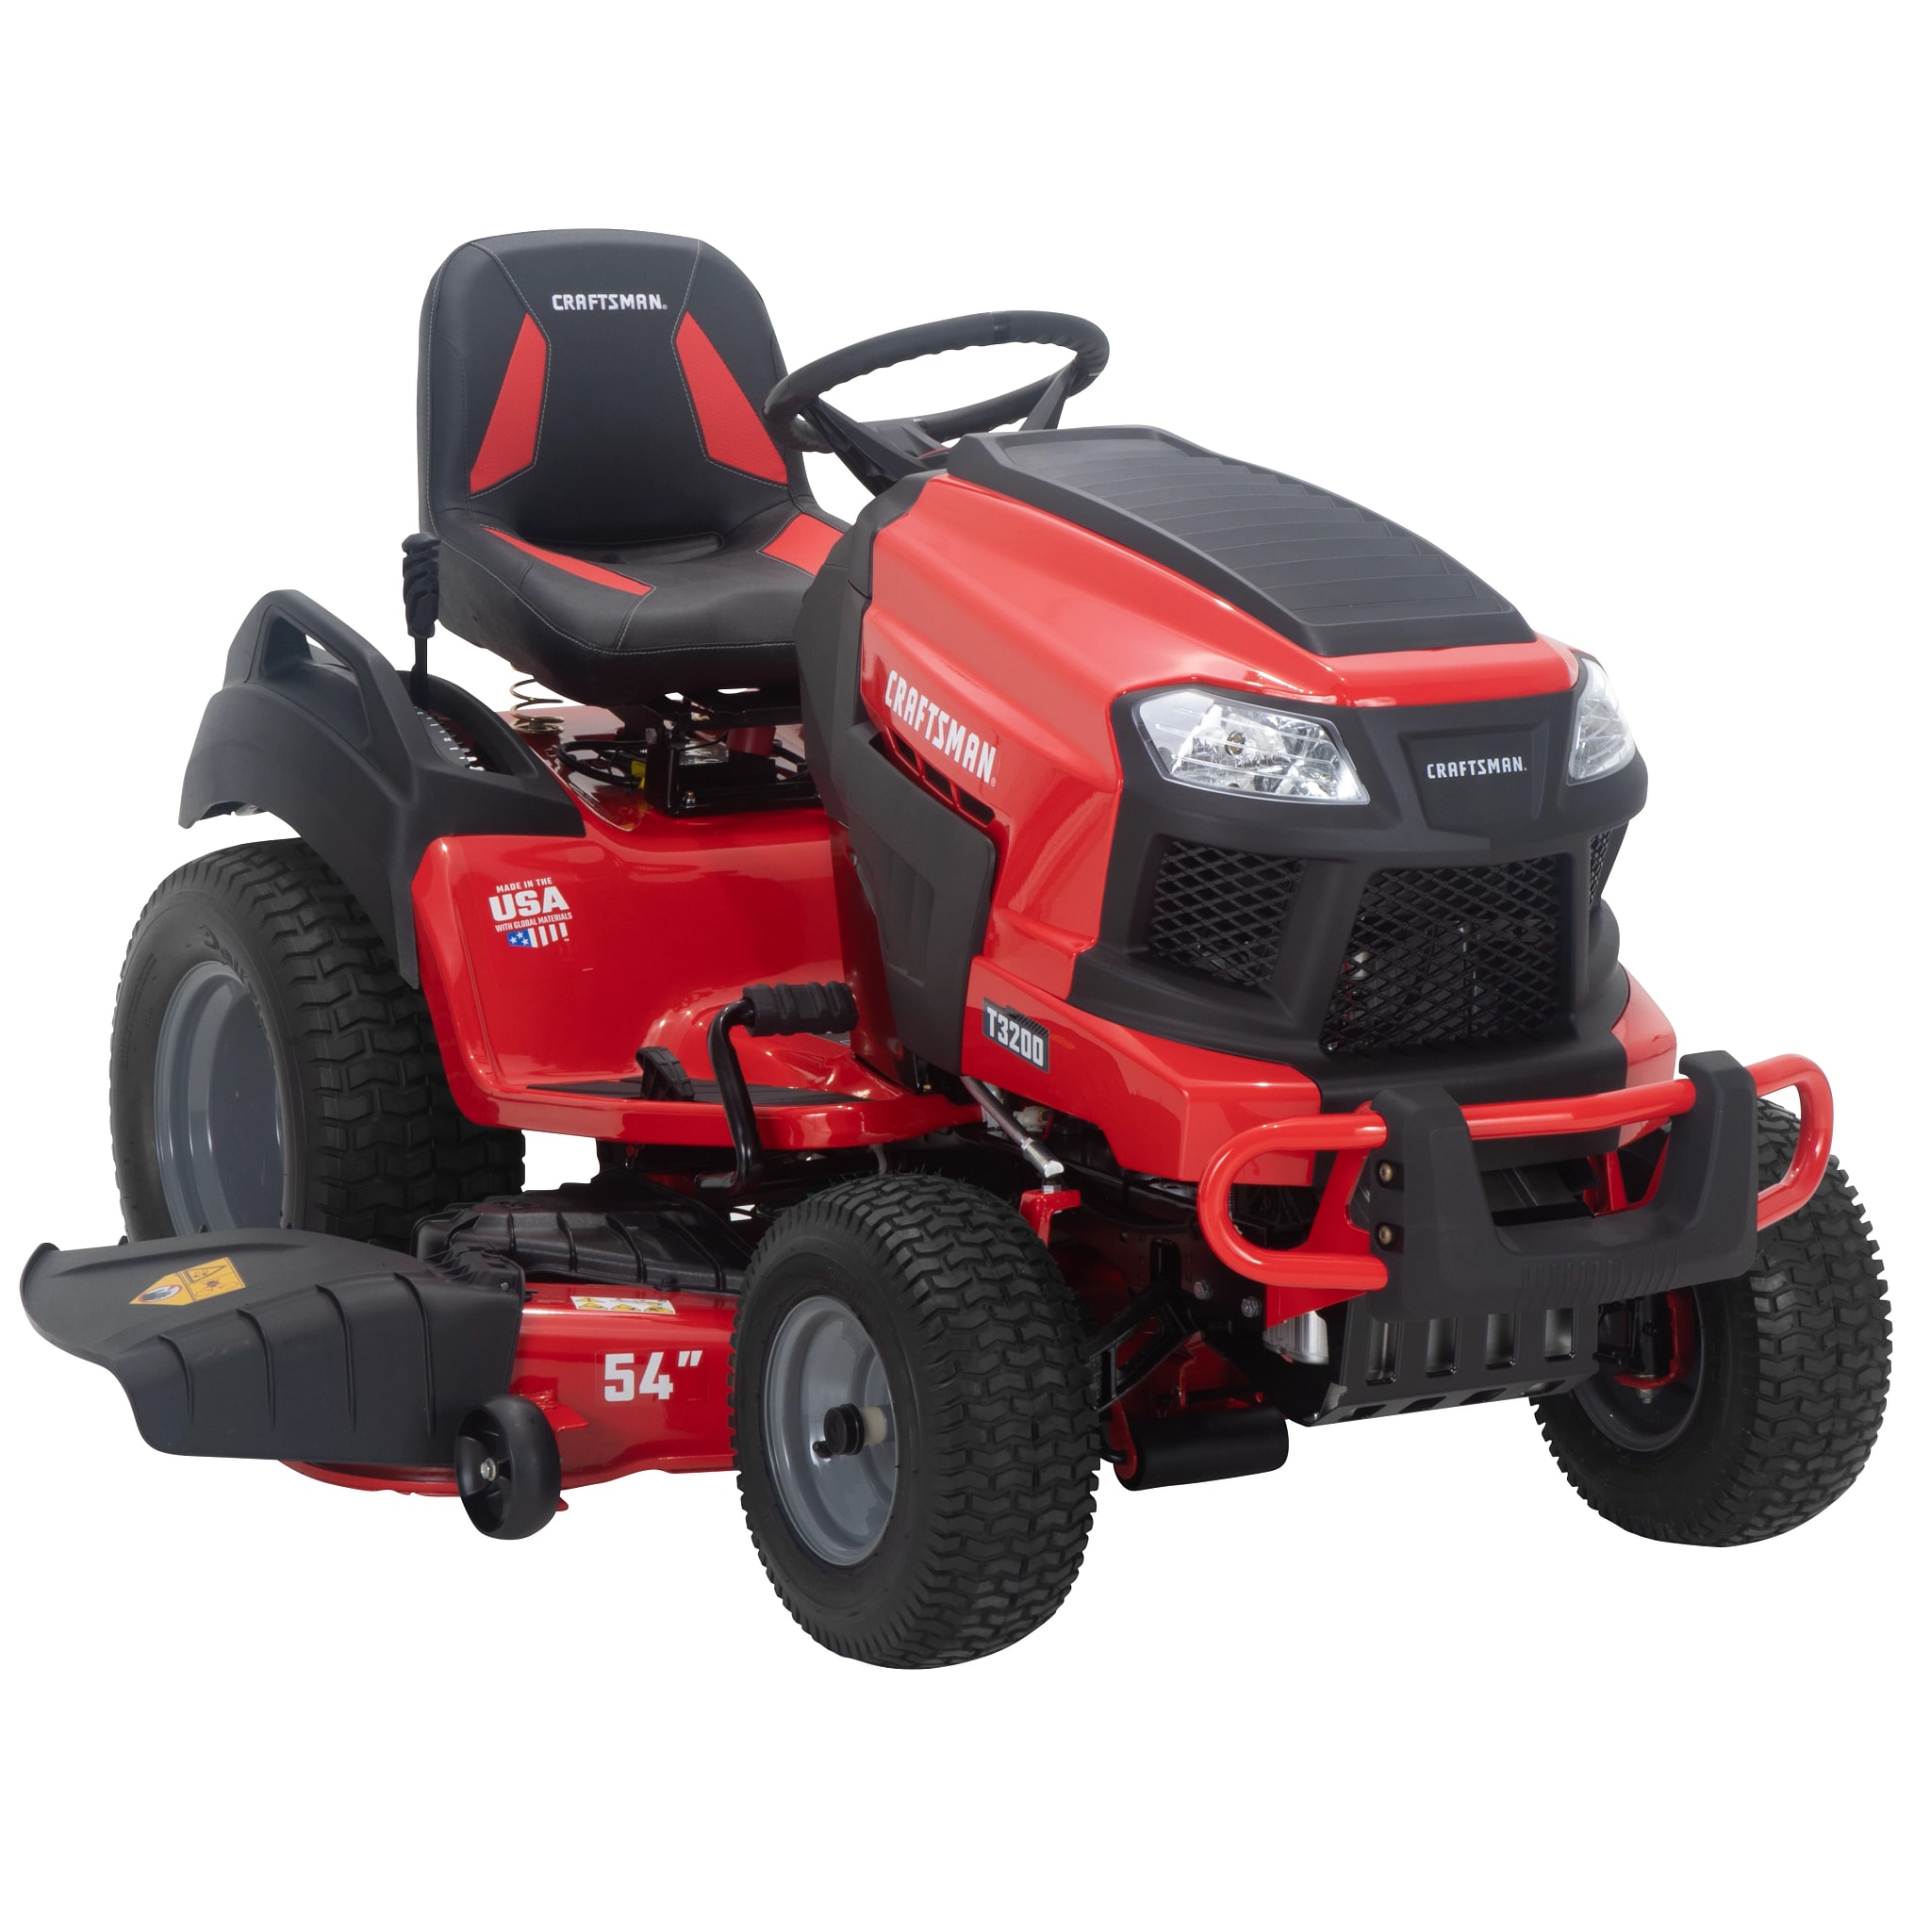 CRAFTSMAN T310 Turn Tight 54-in 24-HP V-twin Riding Lawn Mower At